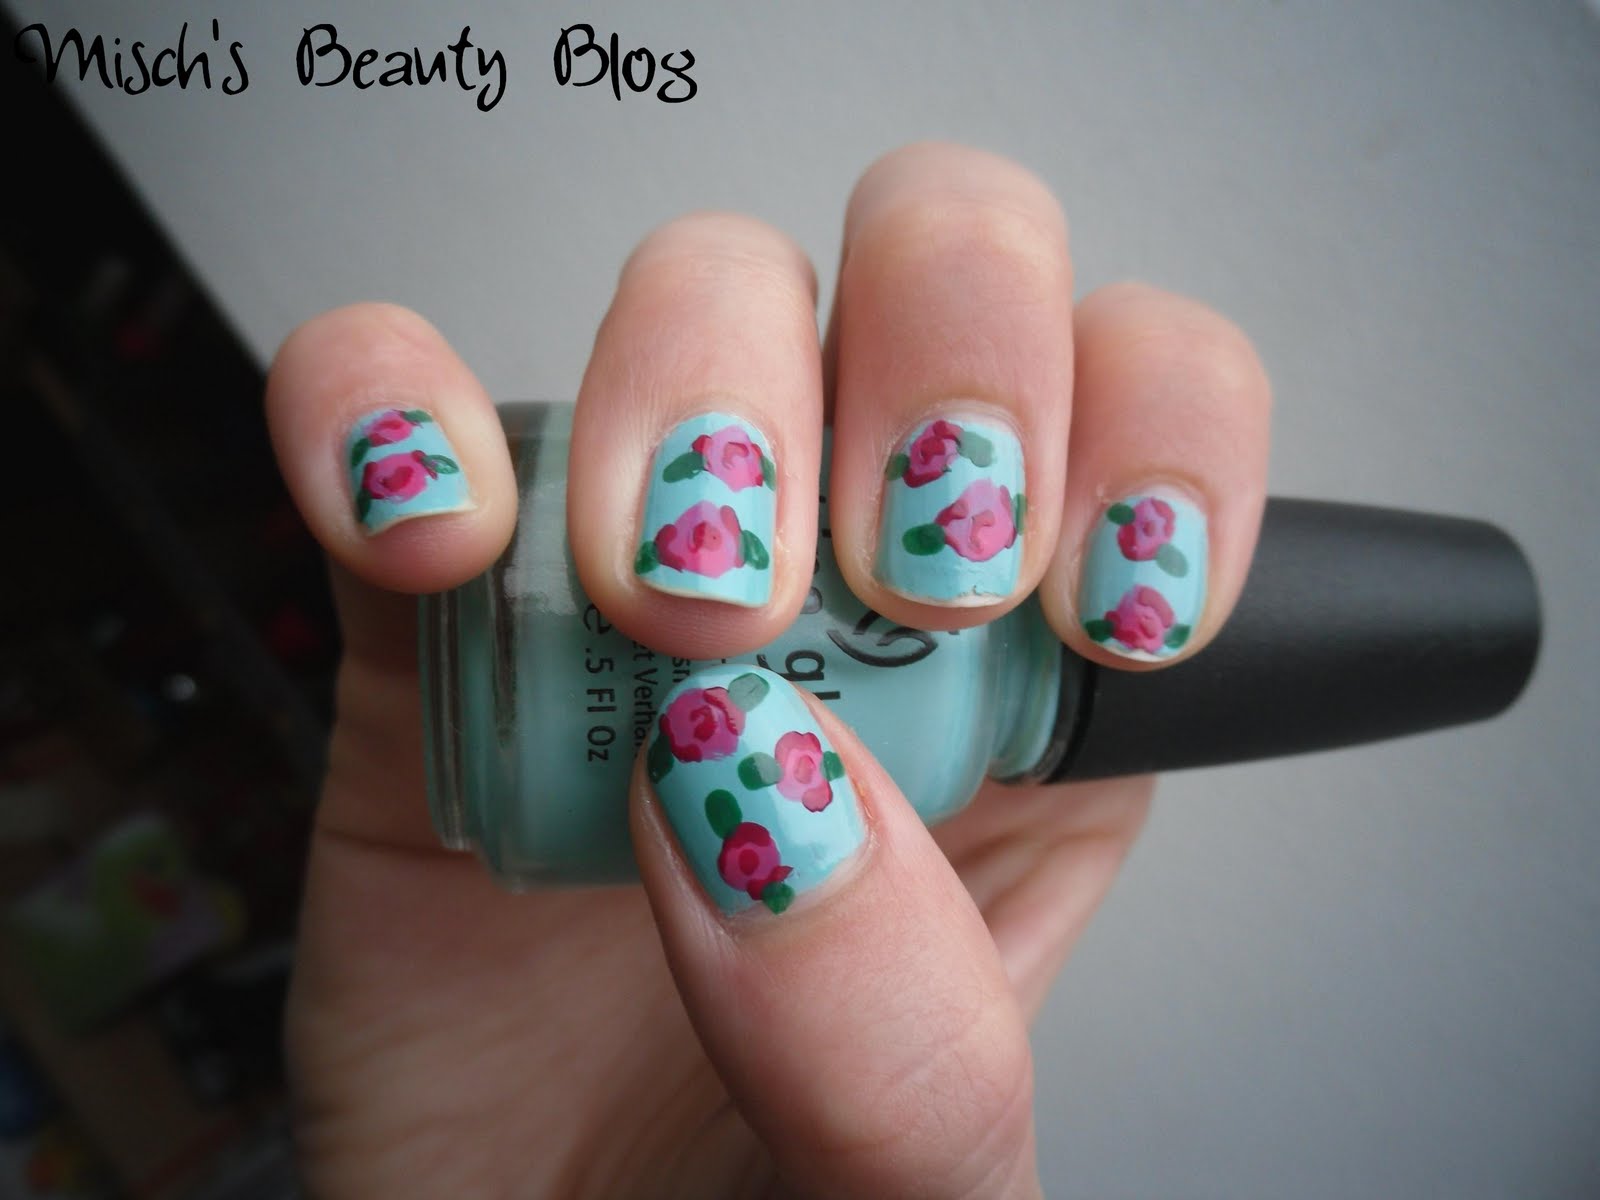 2. "DIY Rose Nail Art with Crystals" - wide 7